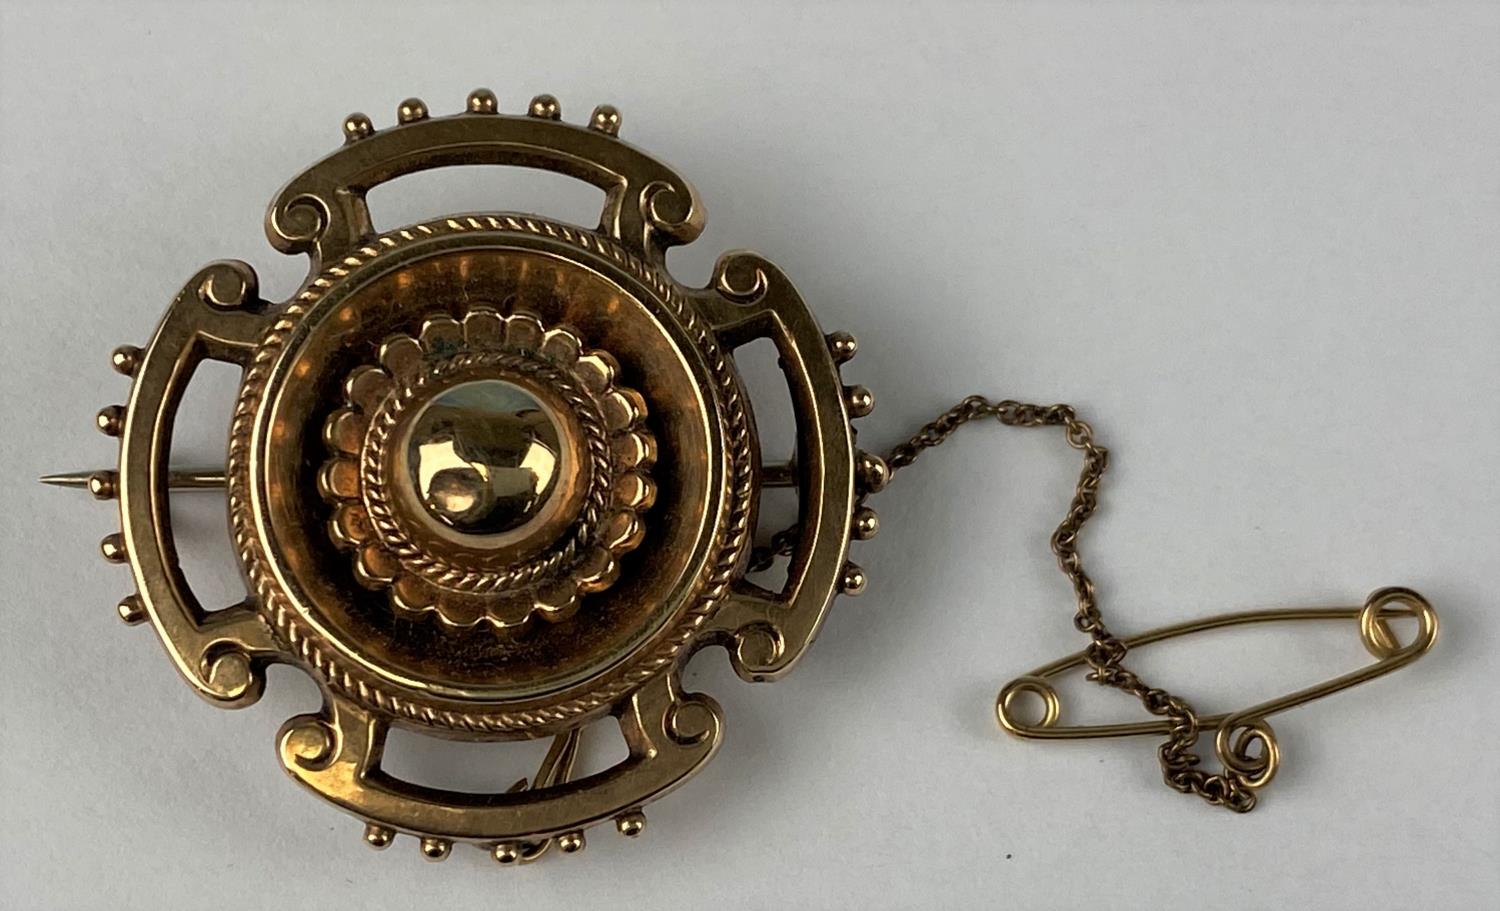 A round Victorian target brooch with fancy decoration supporting four cut out sections, bobbled